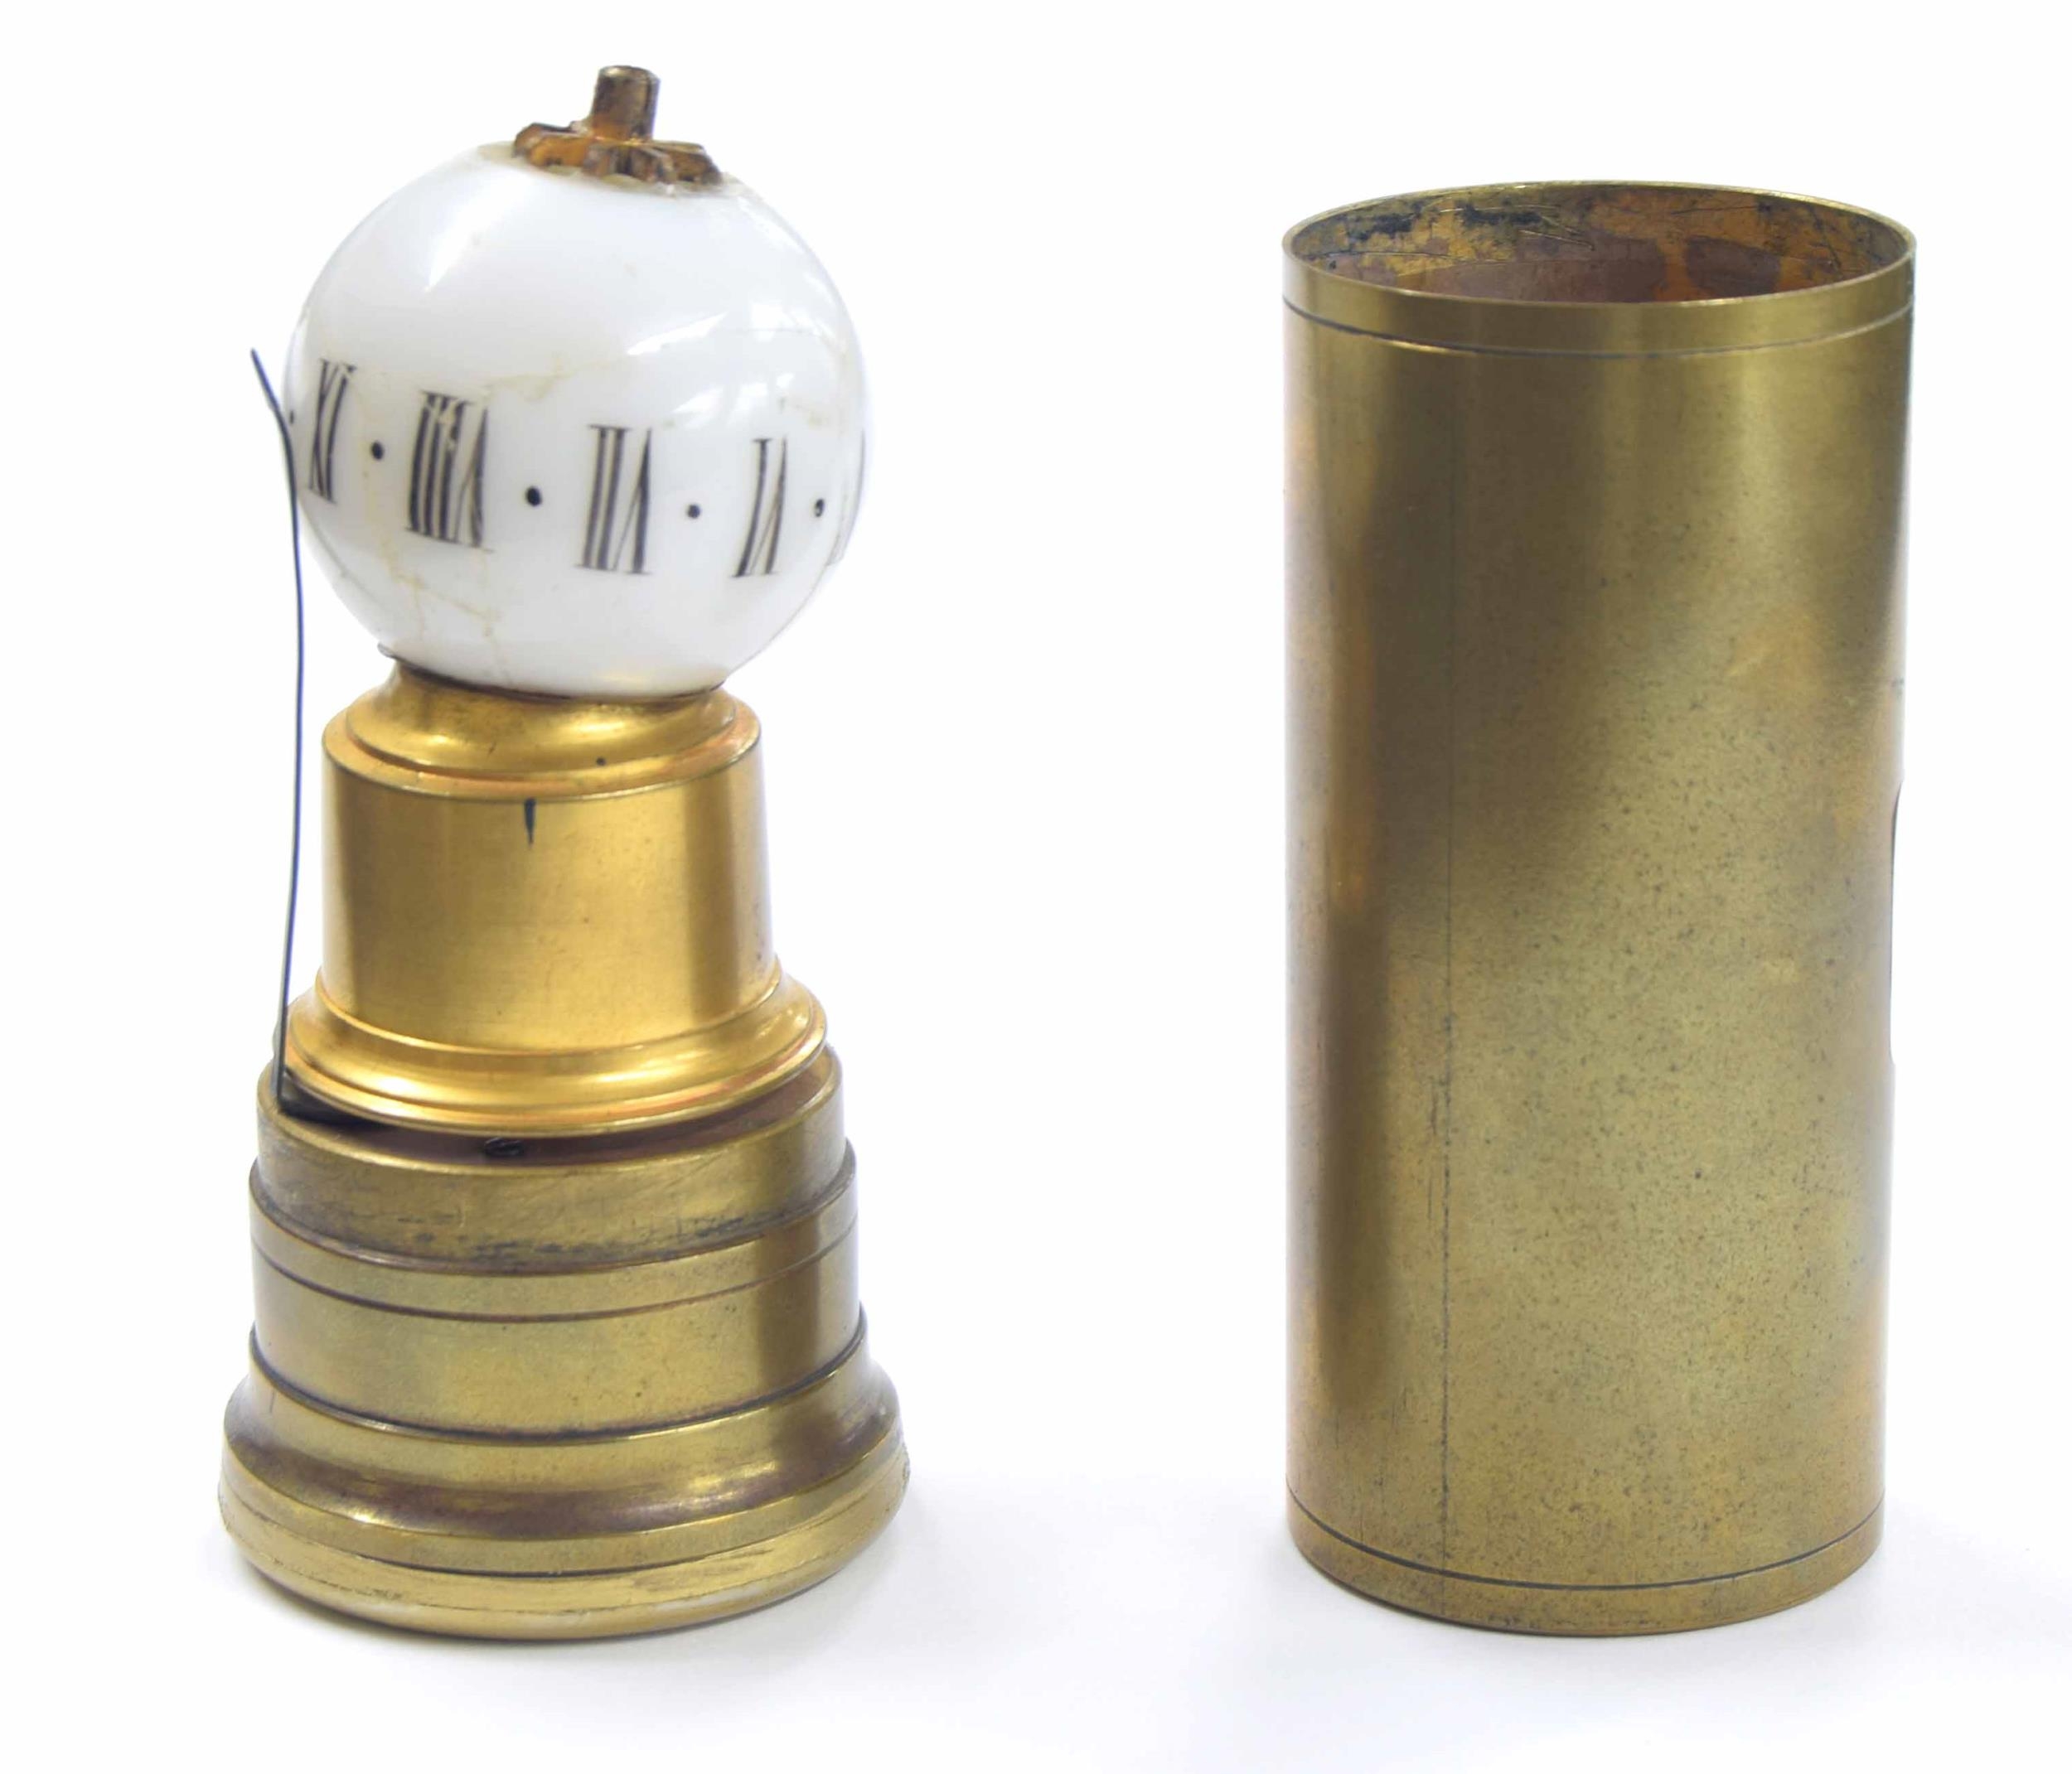 Interesting miniature cylindrical brass night clock with globular opaque glass shade inscribed